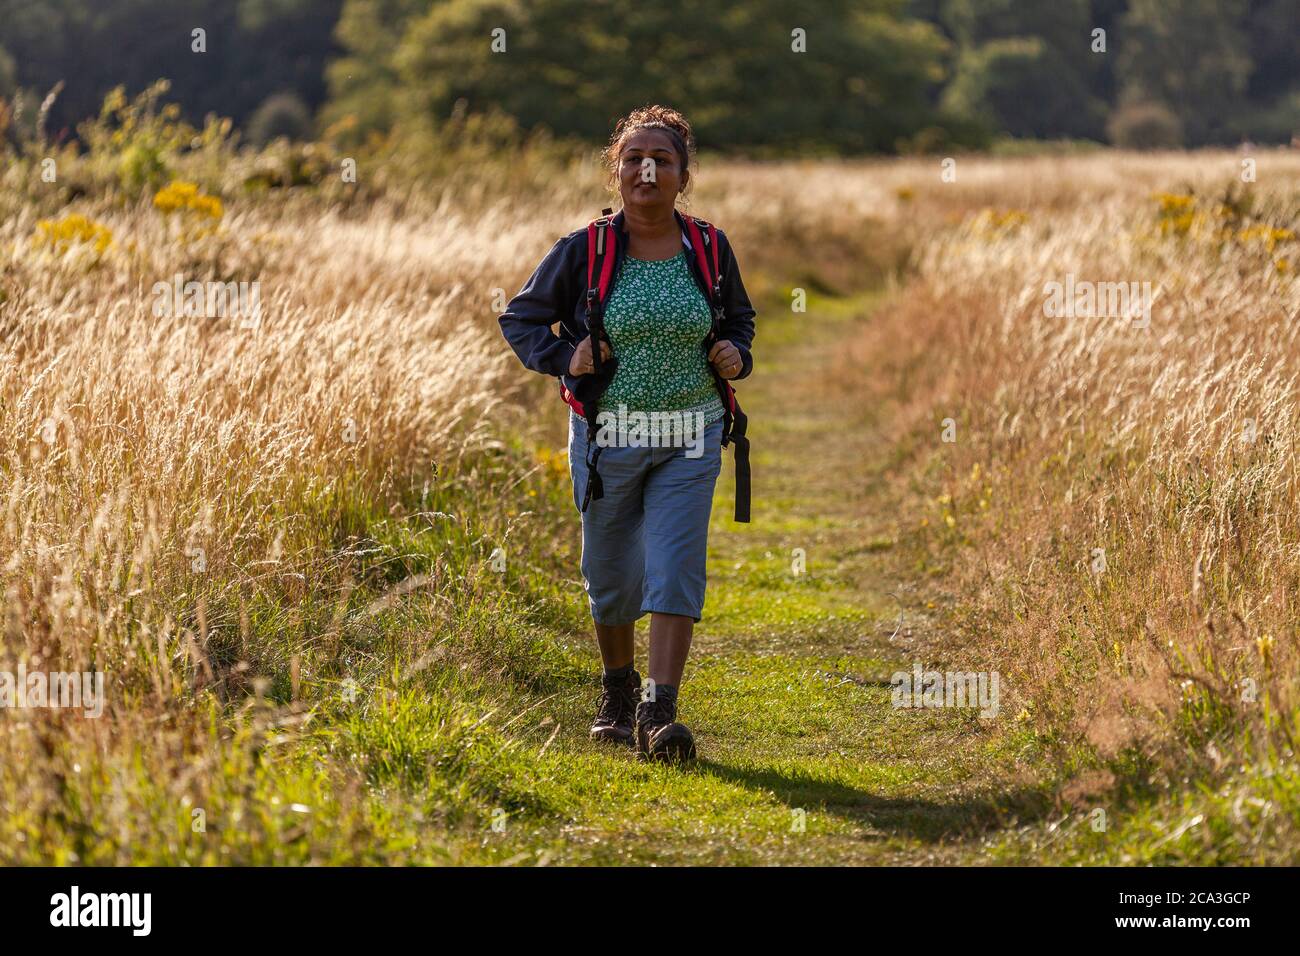 A woman walking with backpack in the field Stock Photo